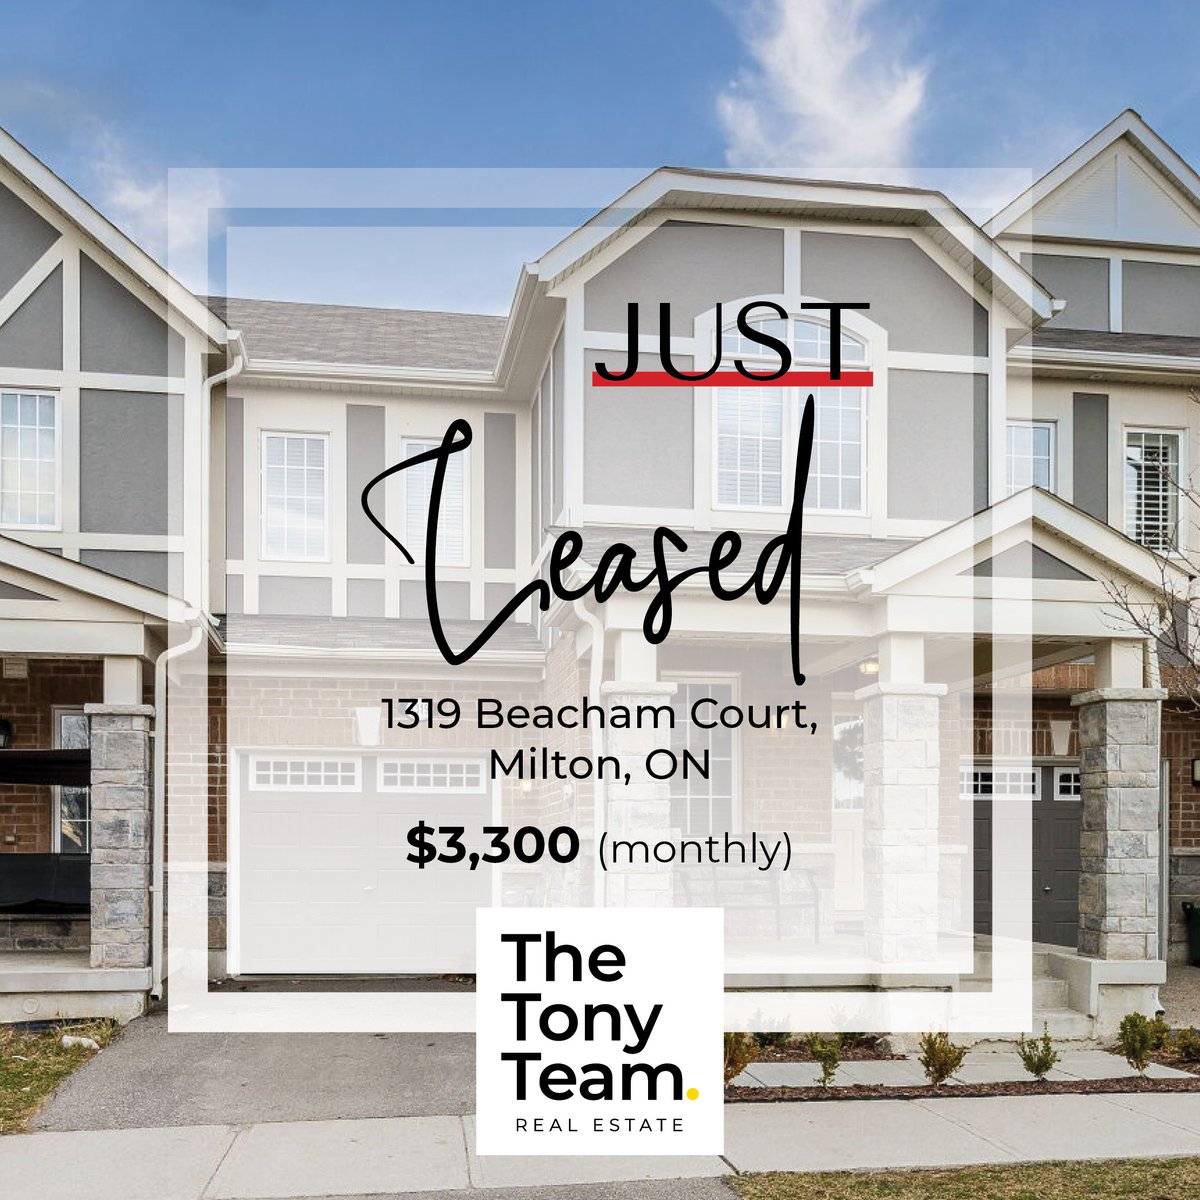 🔈 Just Leased

📍1319 Beacham Court, Milton

📞 Call me to secure the best investment options today!!

#milton #justleased #investmentproperty #smartinvestment #remax #aboutowne